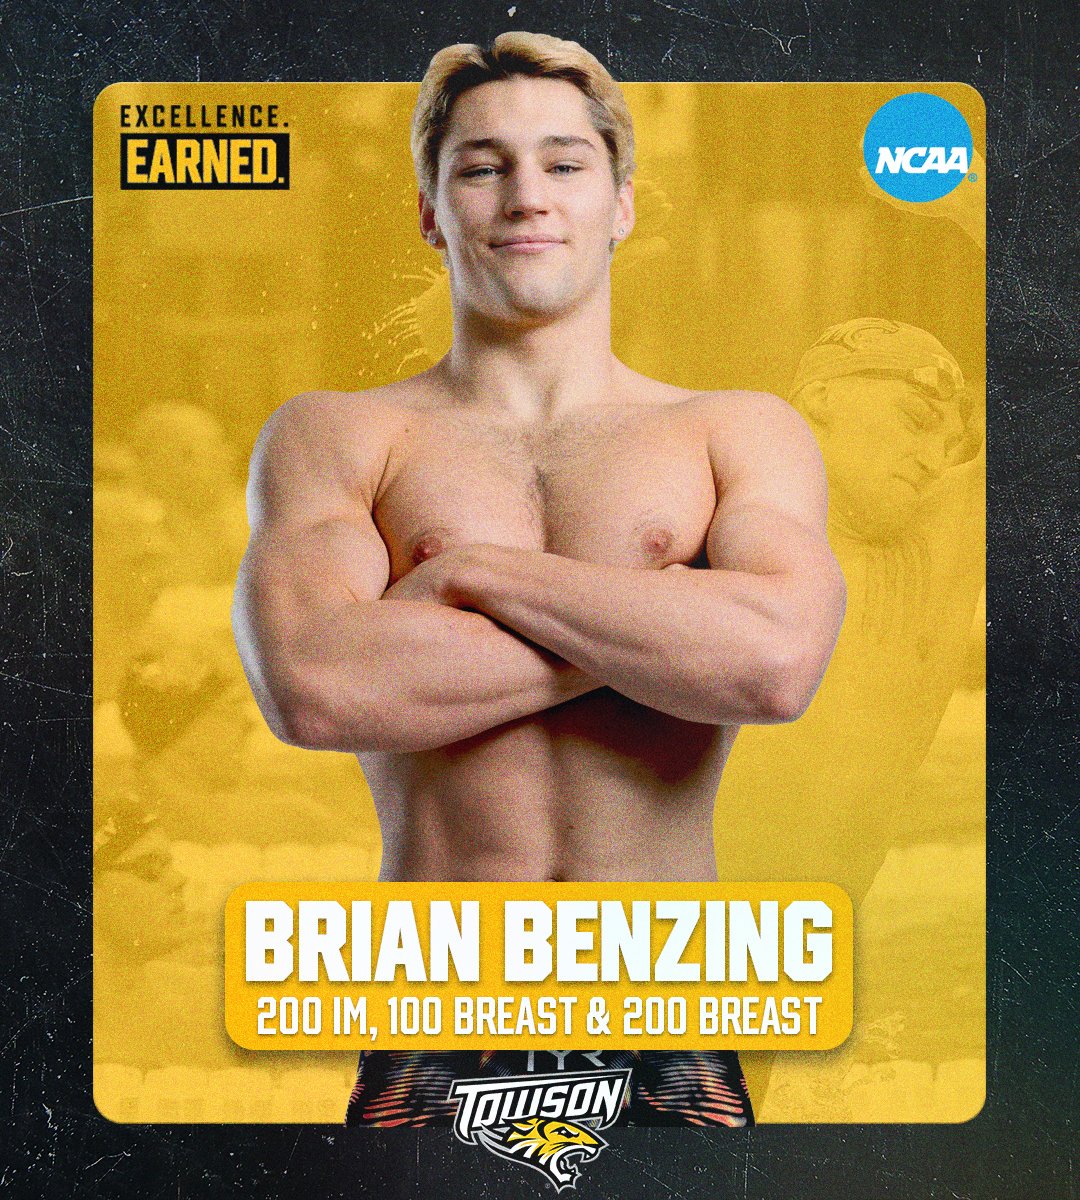 For the third time in three years, @brian_benzing is headed to the NCAA Swimming & Diving Championships 💪 He'll compete in the 200 IM, 100 breast & 200 breast #GohTigers